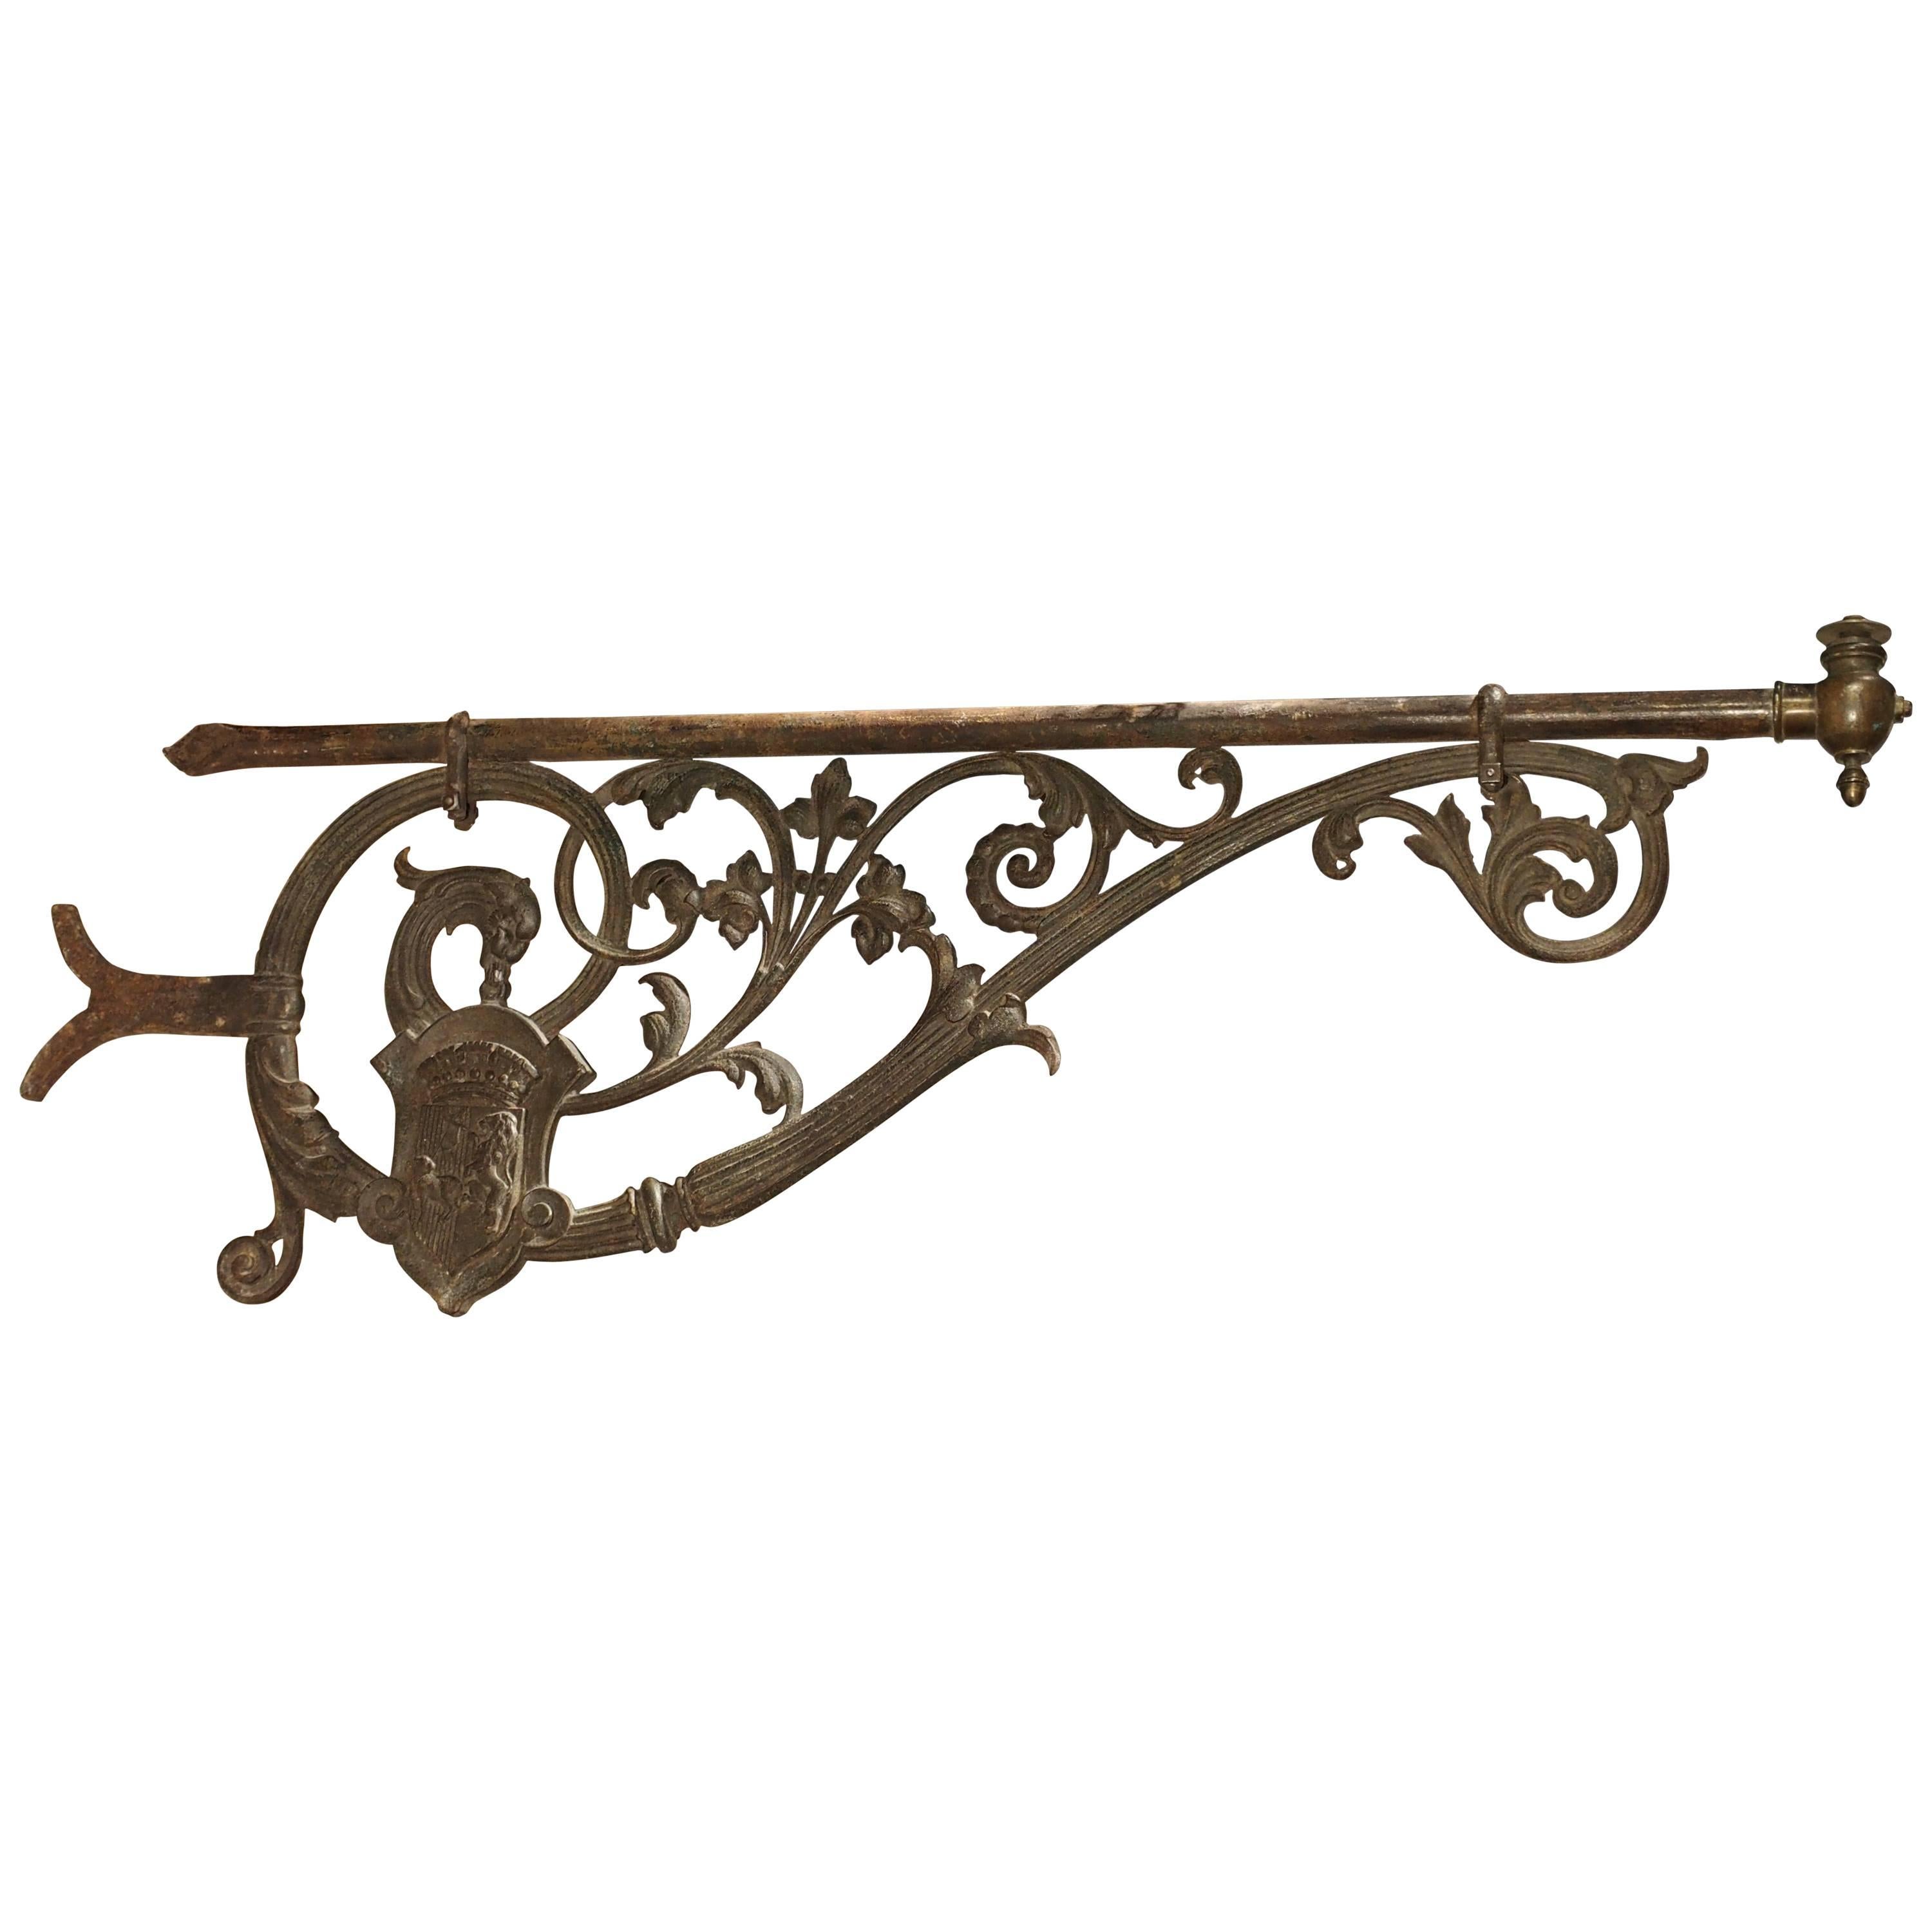 Large 19th Century Painted Iron Sign Holder from Bordeaux, France